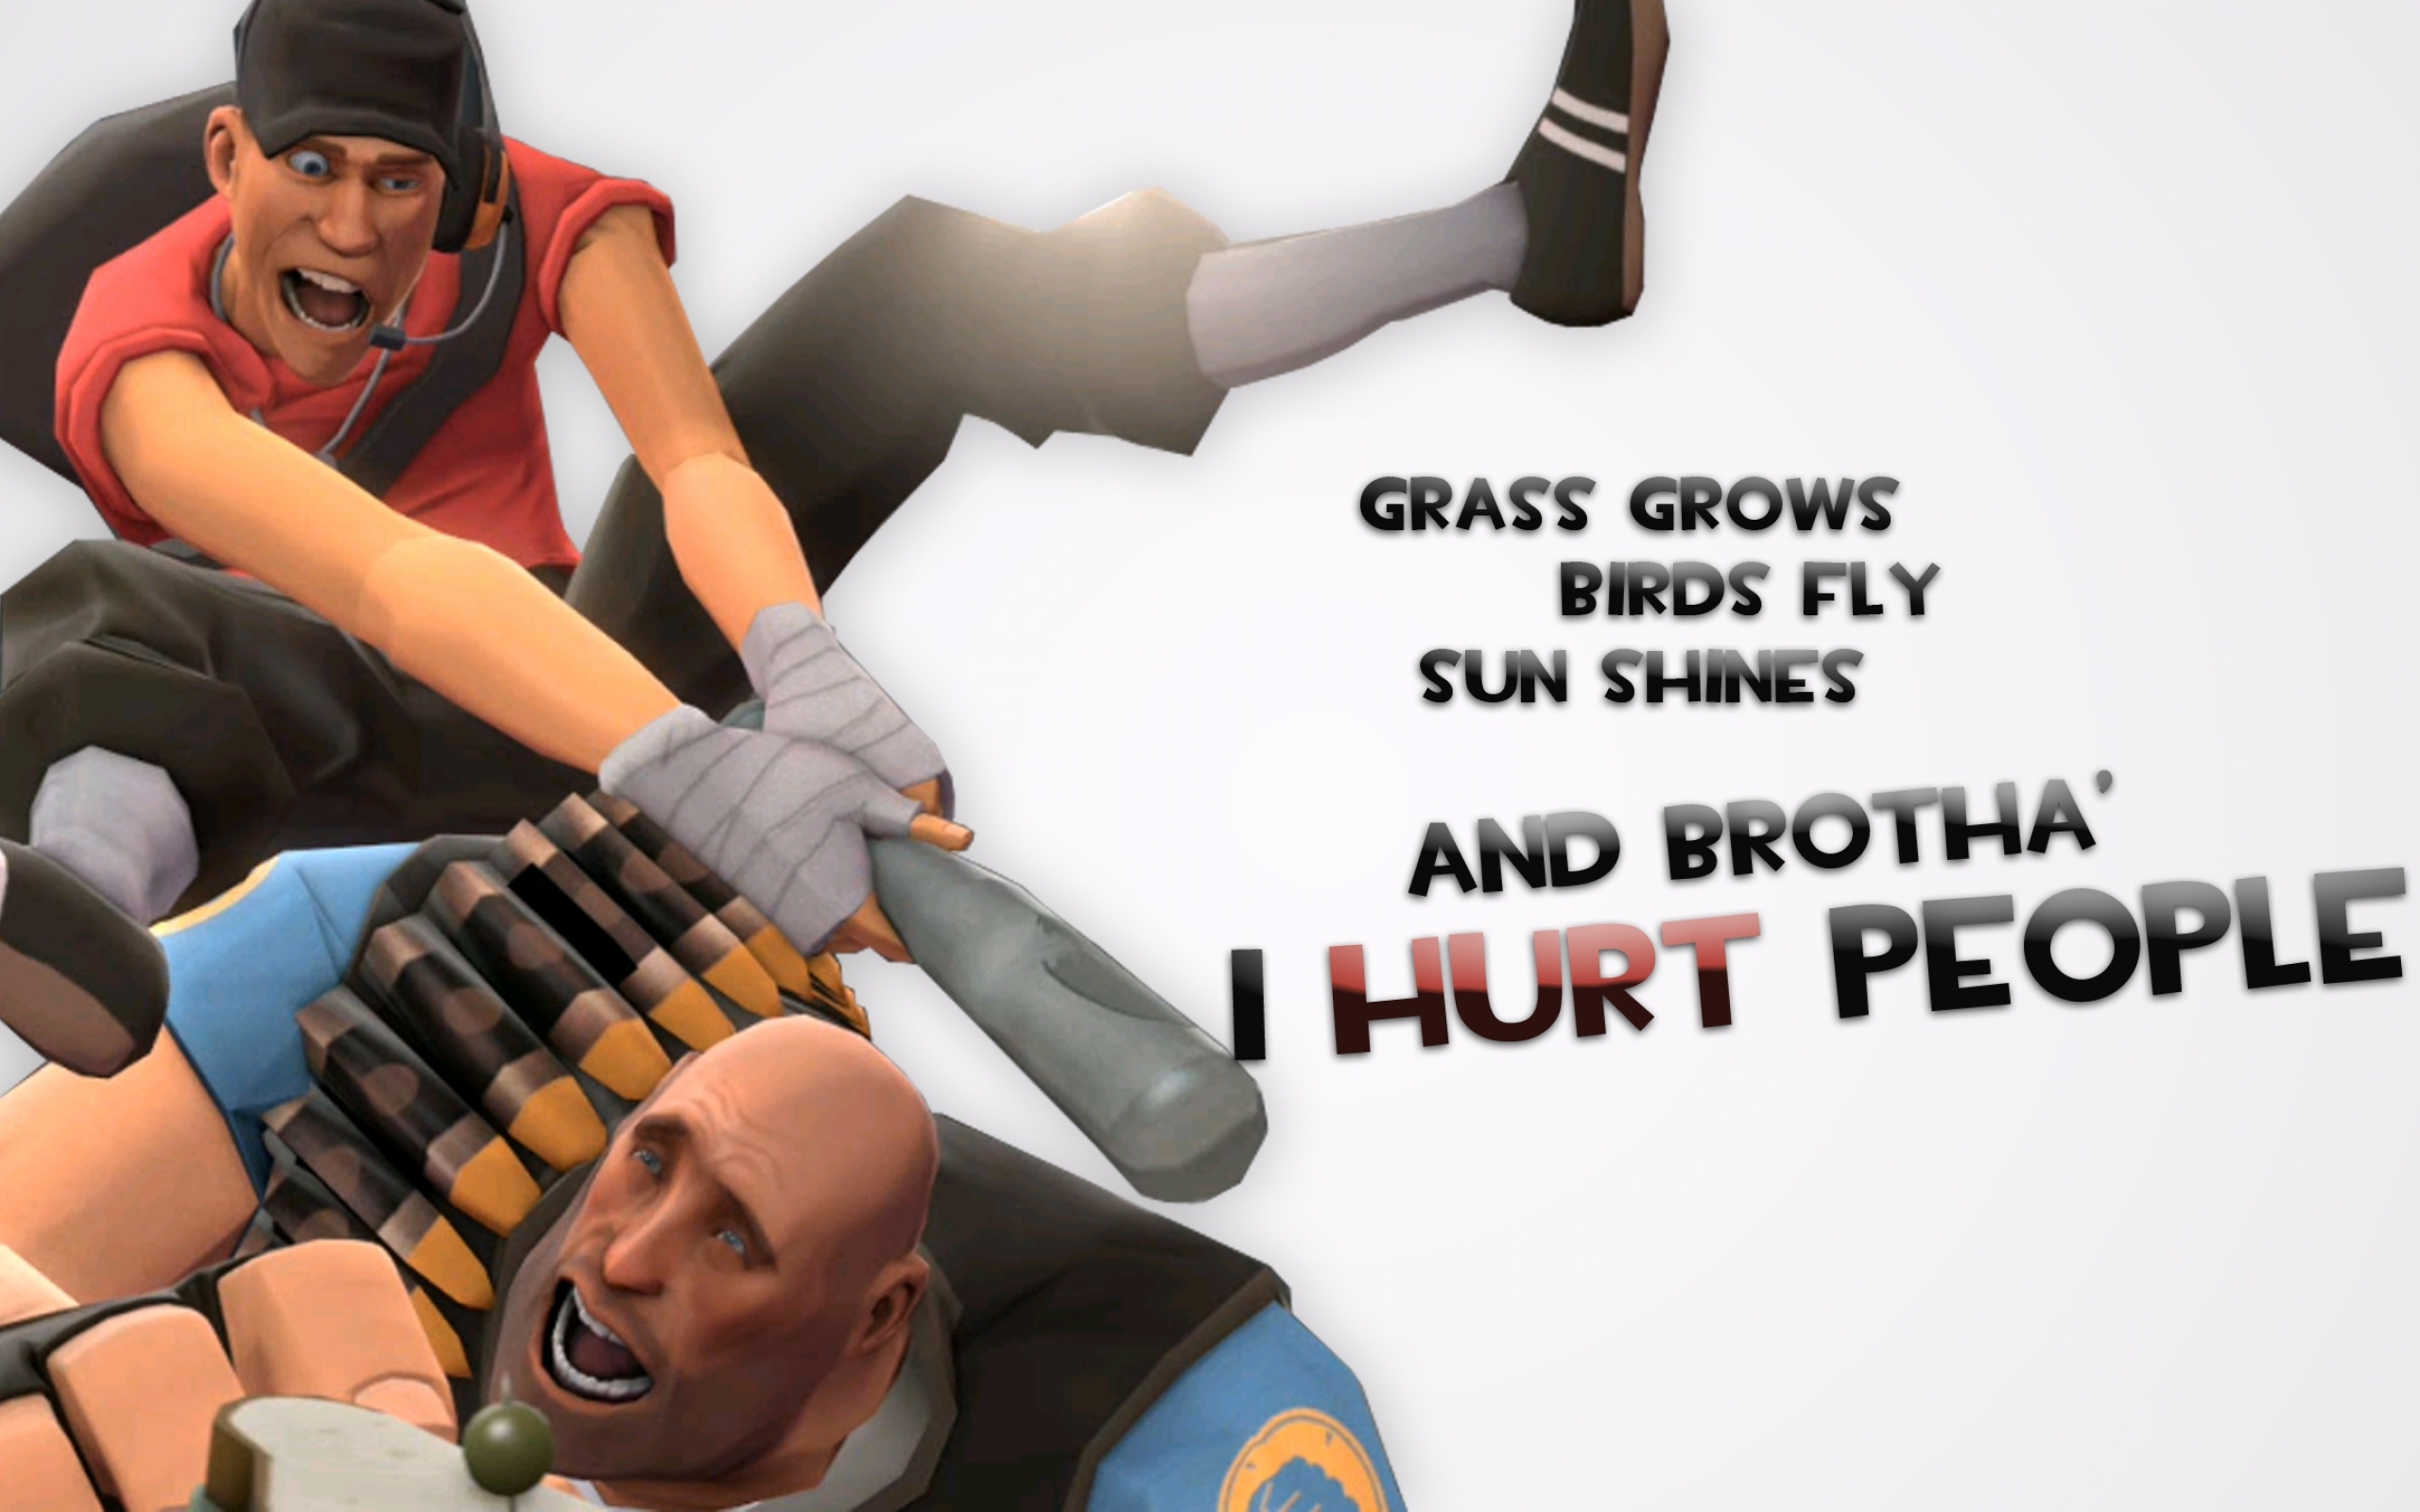 team fortress 2 scout breaks his fingers